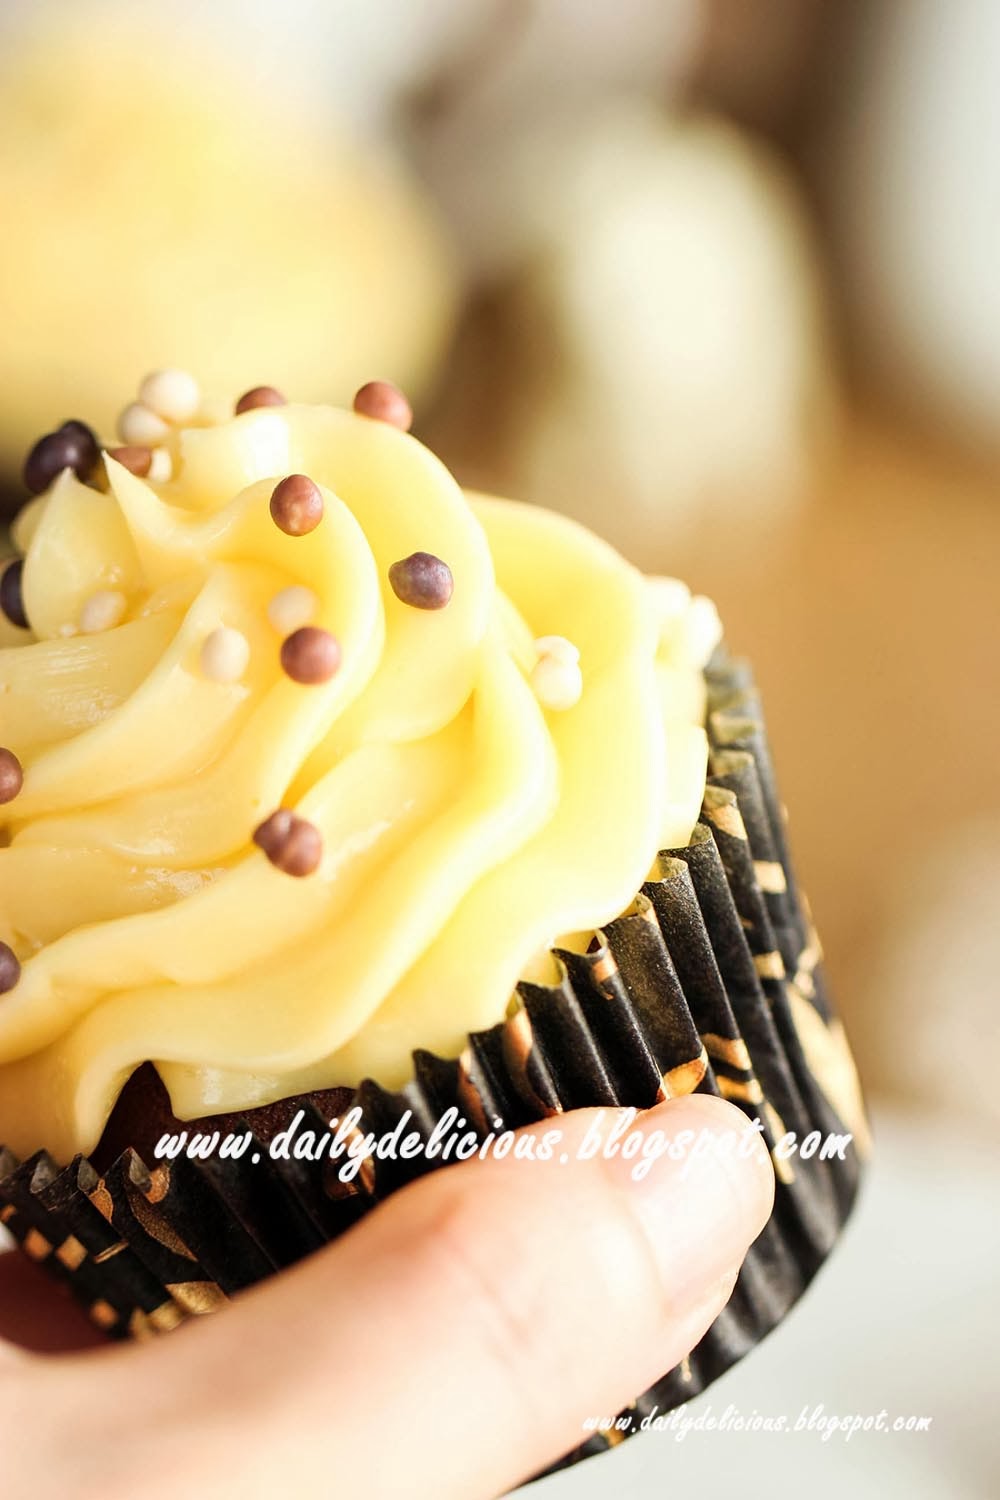 dailydelicious: Low Calorie Chocolate cupcake with Vanilla buttercream